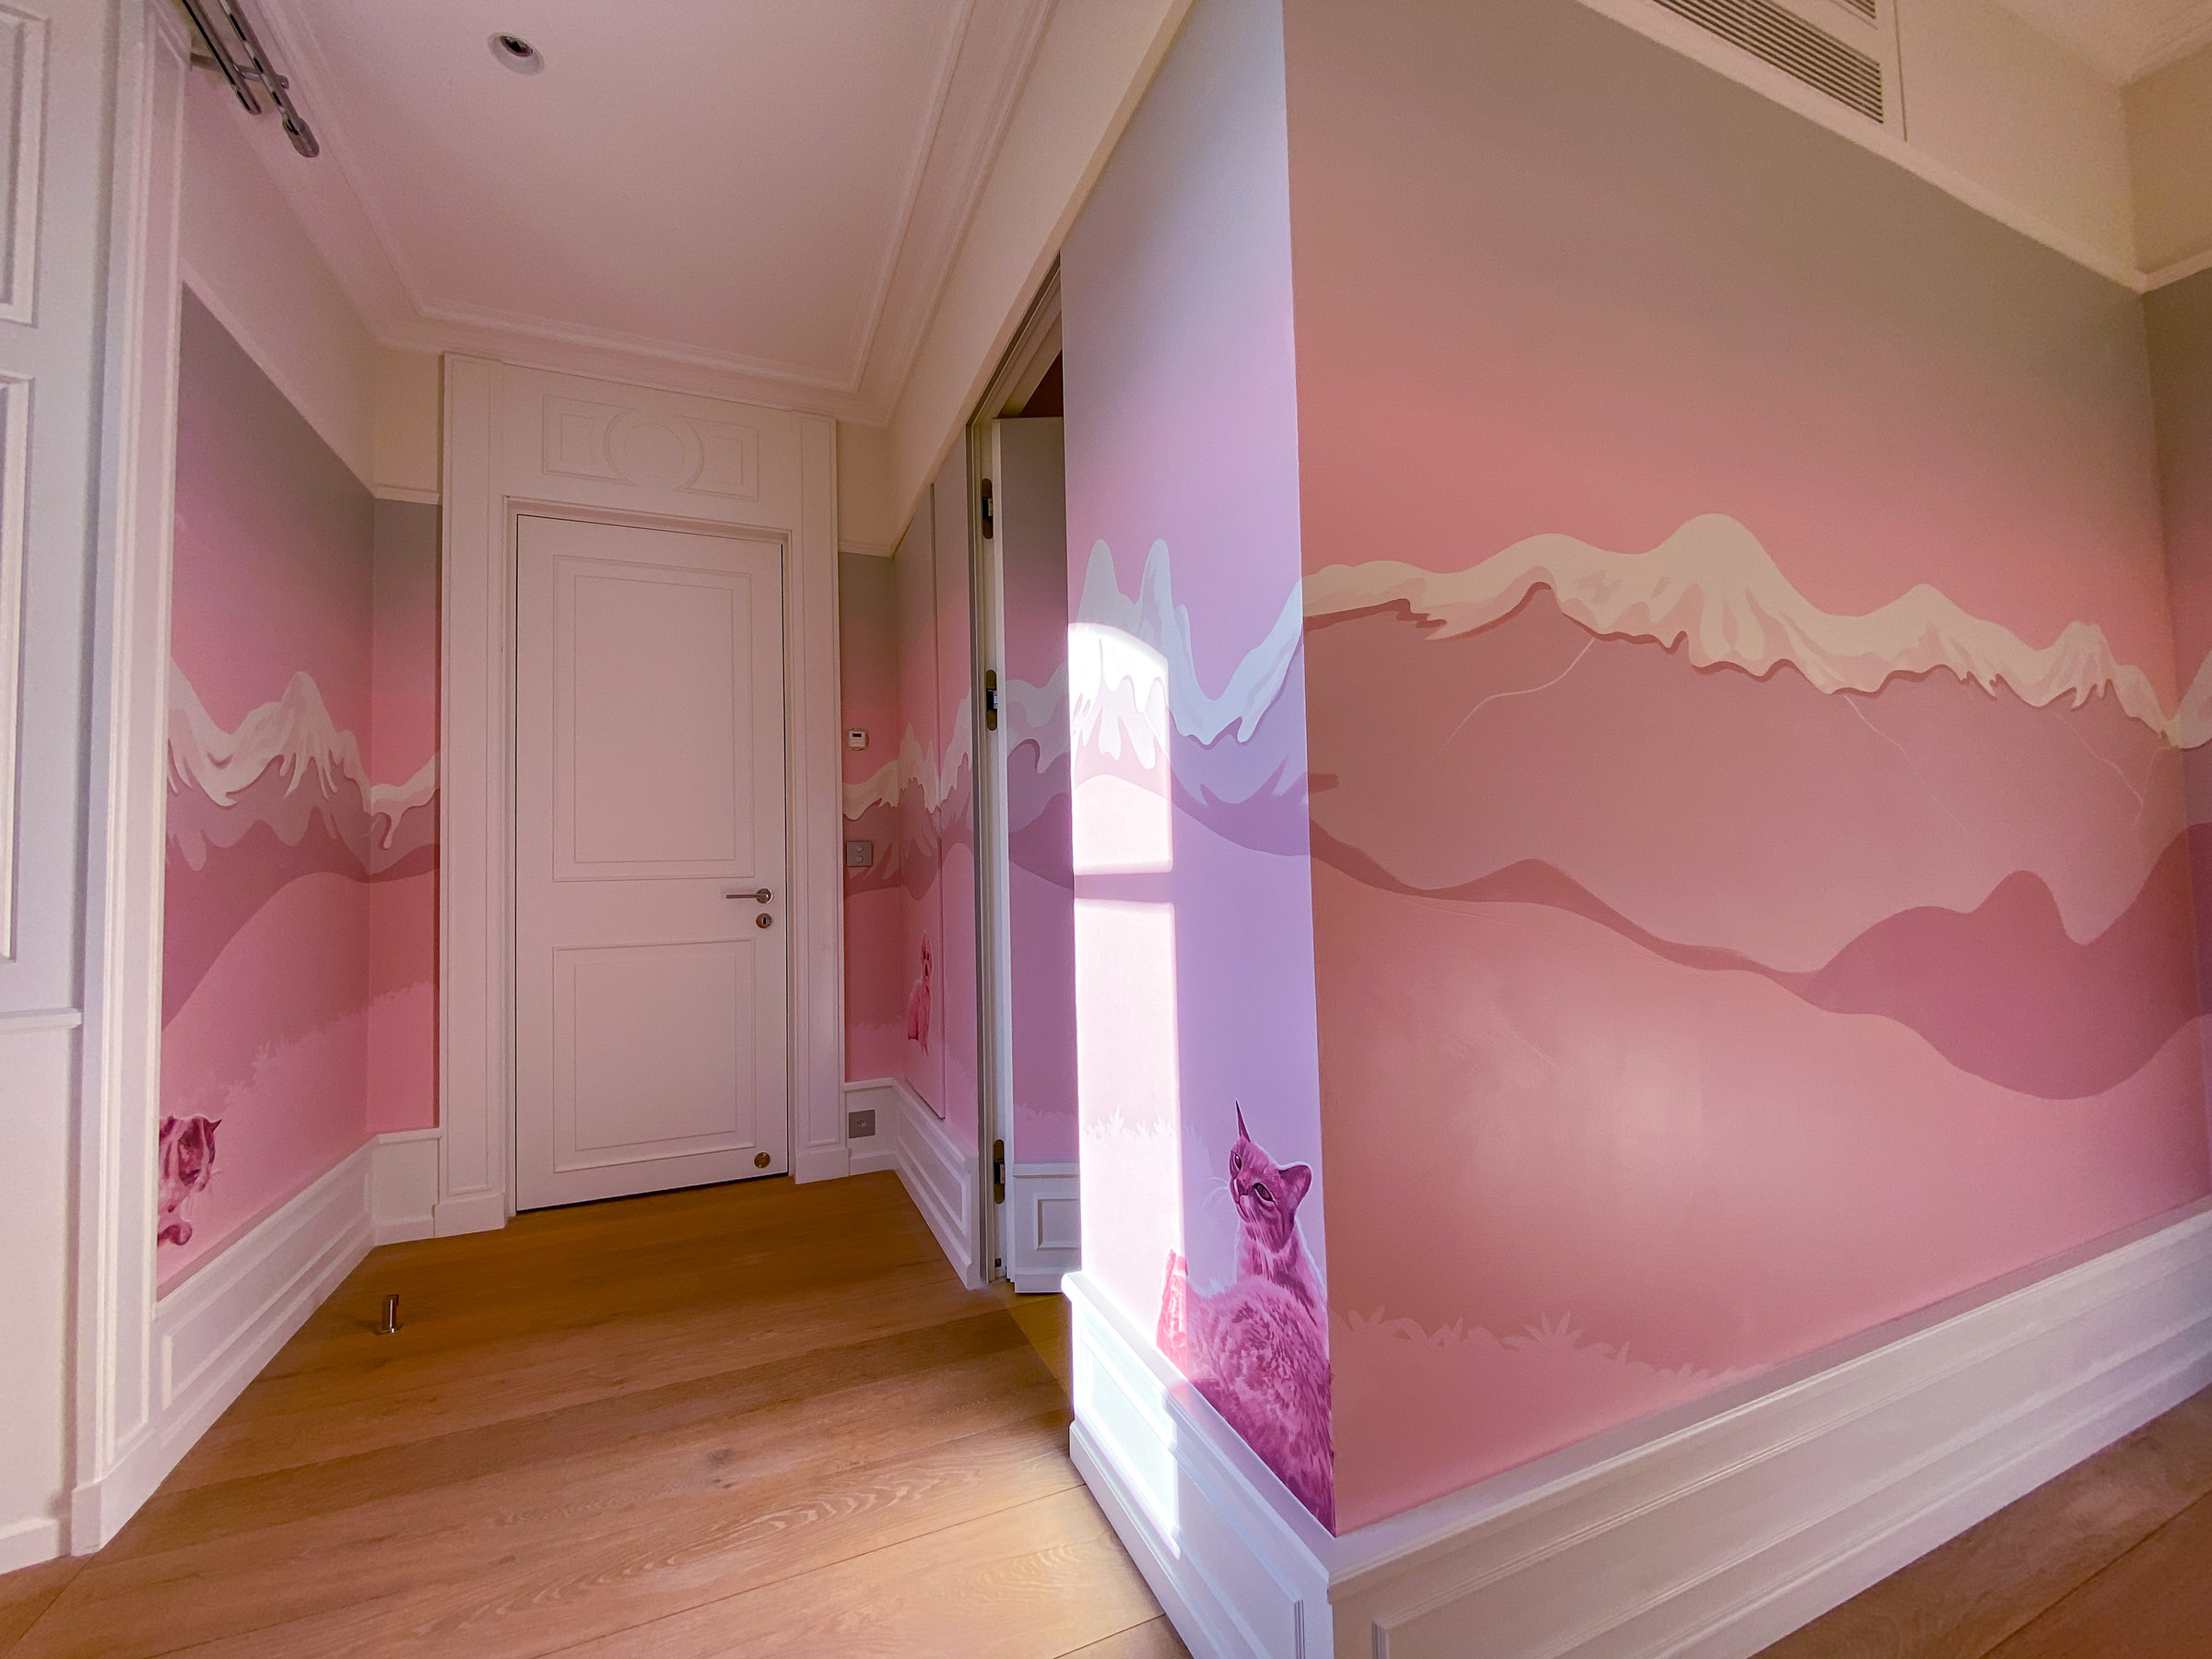 Pretty Pink Mural for girls - The design fits beautifully in the space